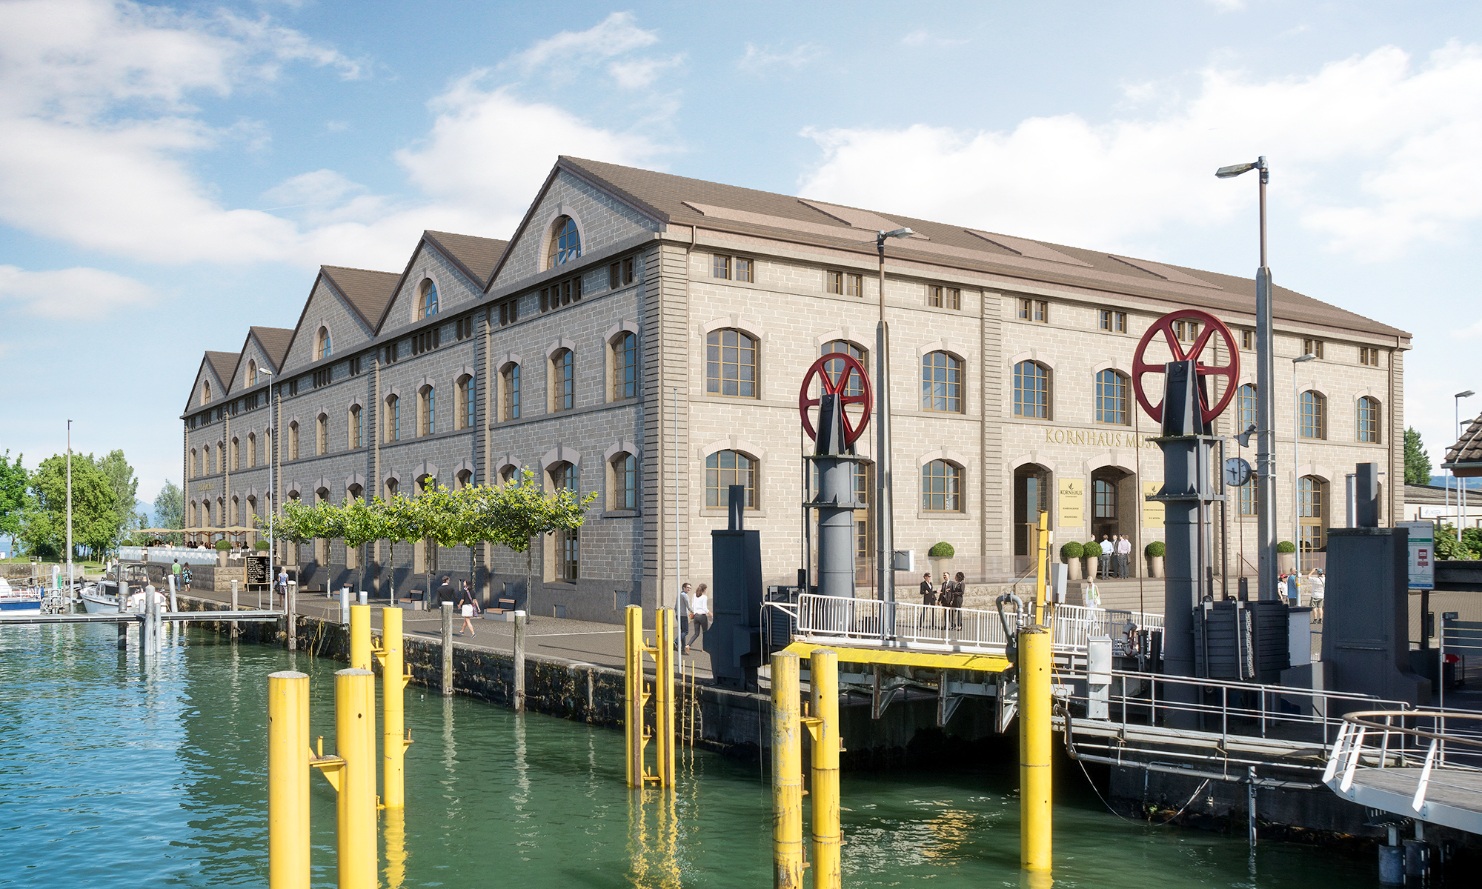 View of the granary conversion from the harbour in Romanshorn.